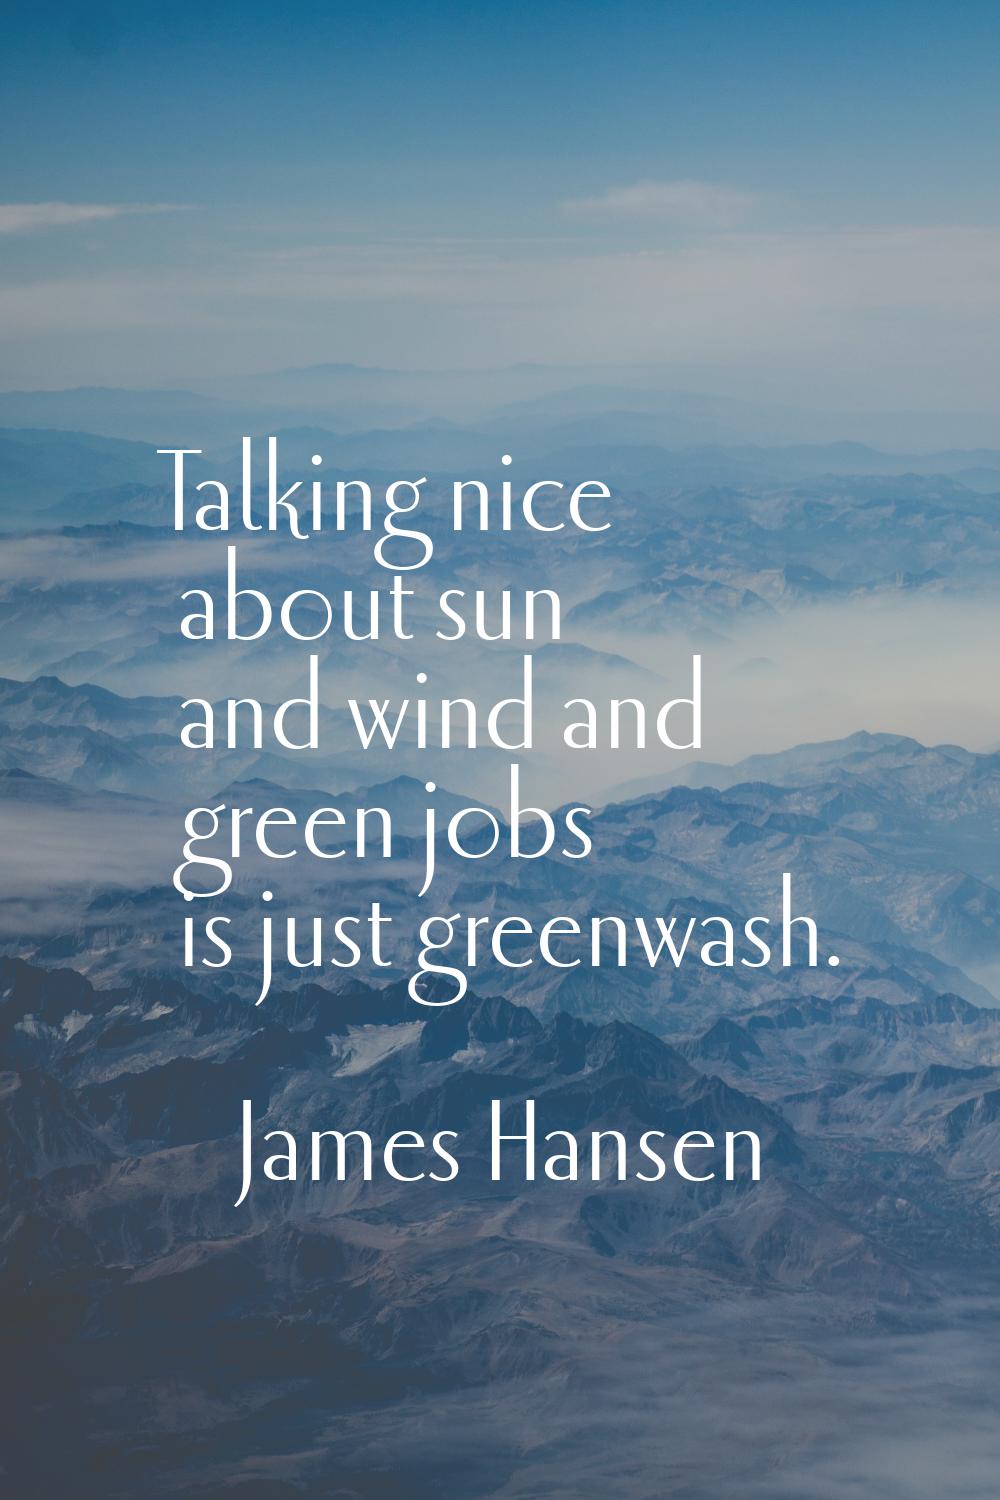 Talking nice about sun and wind and green jobs is just greenwash.